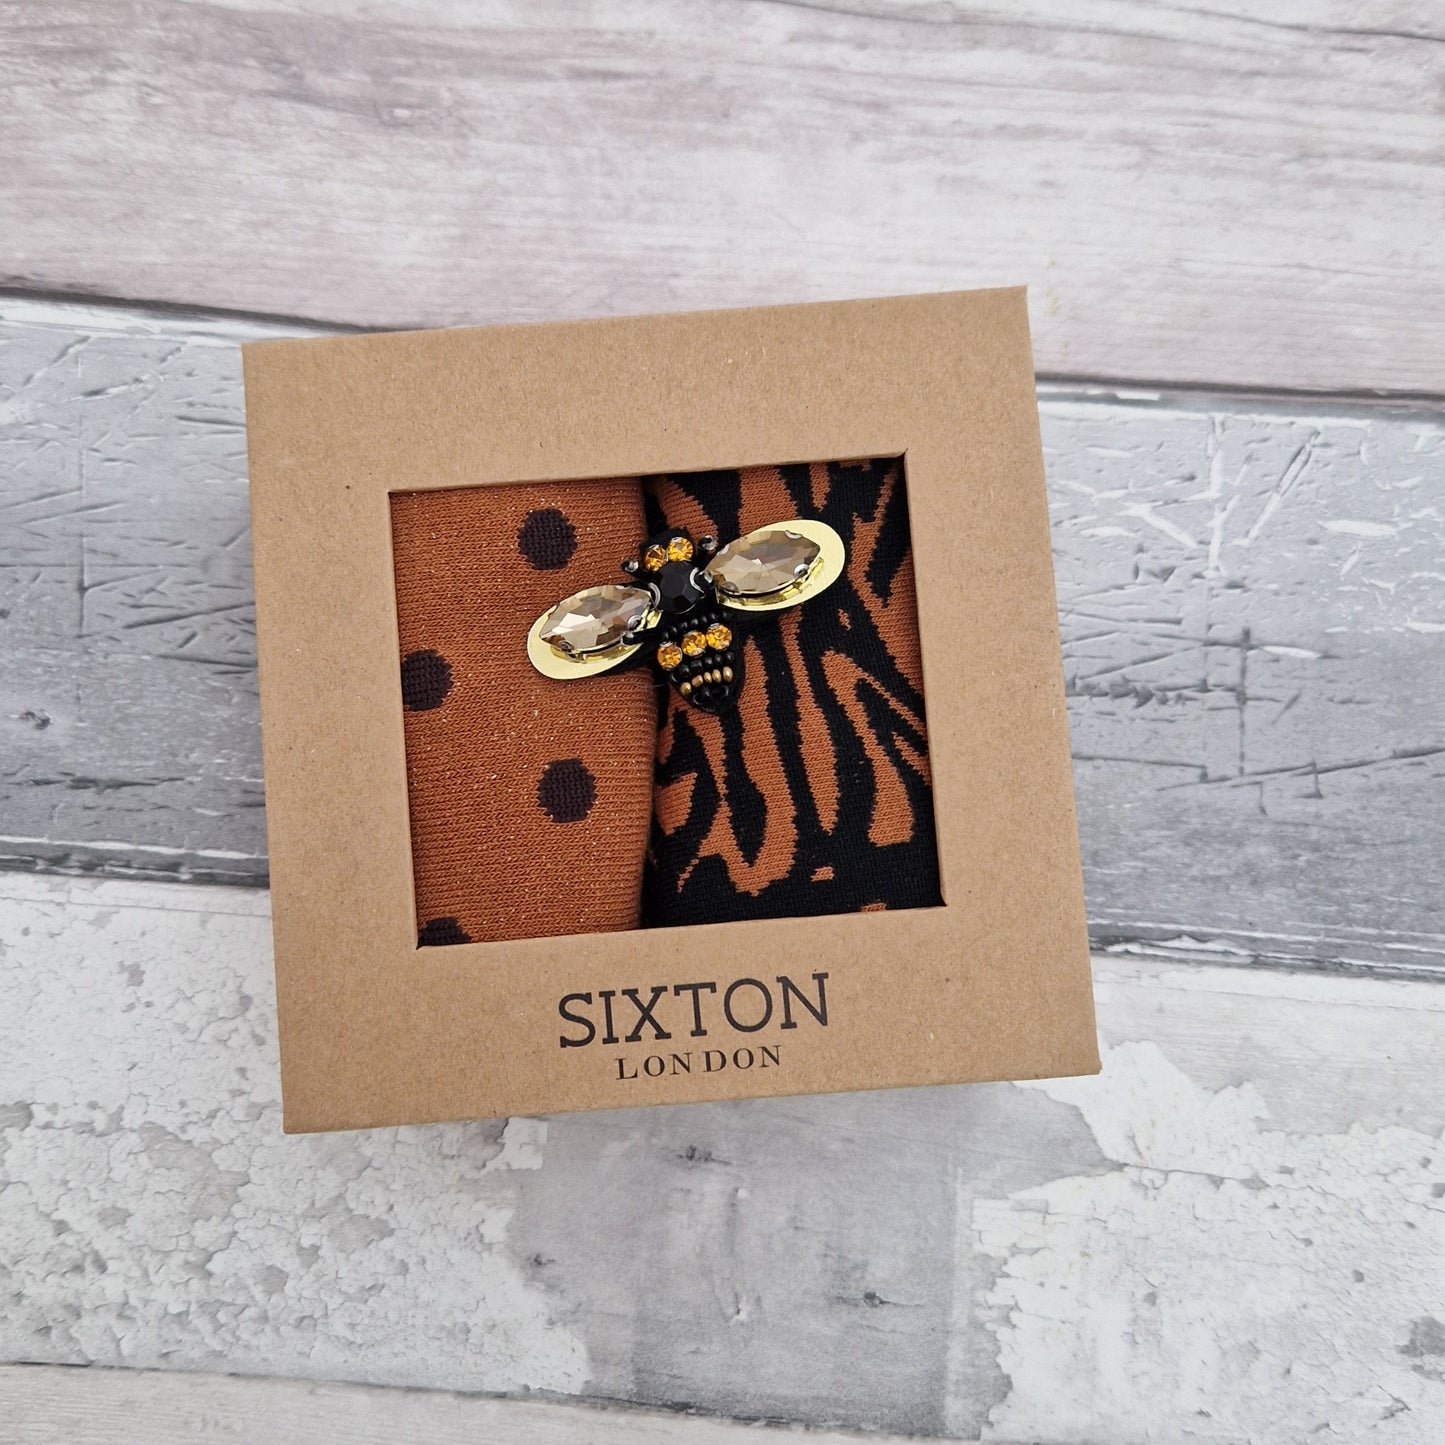 2 Pairs of rust coloured socks presented in a gift box with a sparkling Bee Brooch made of recycled glass.